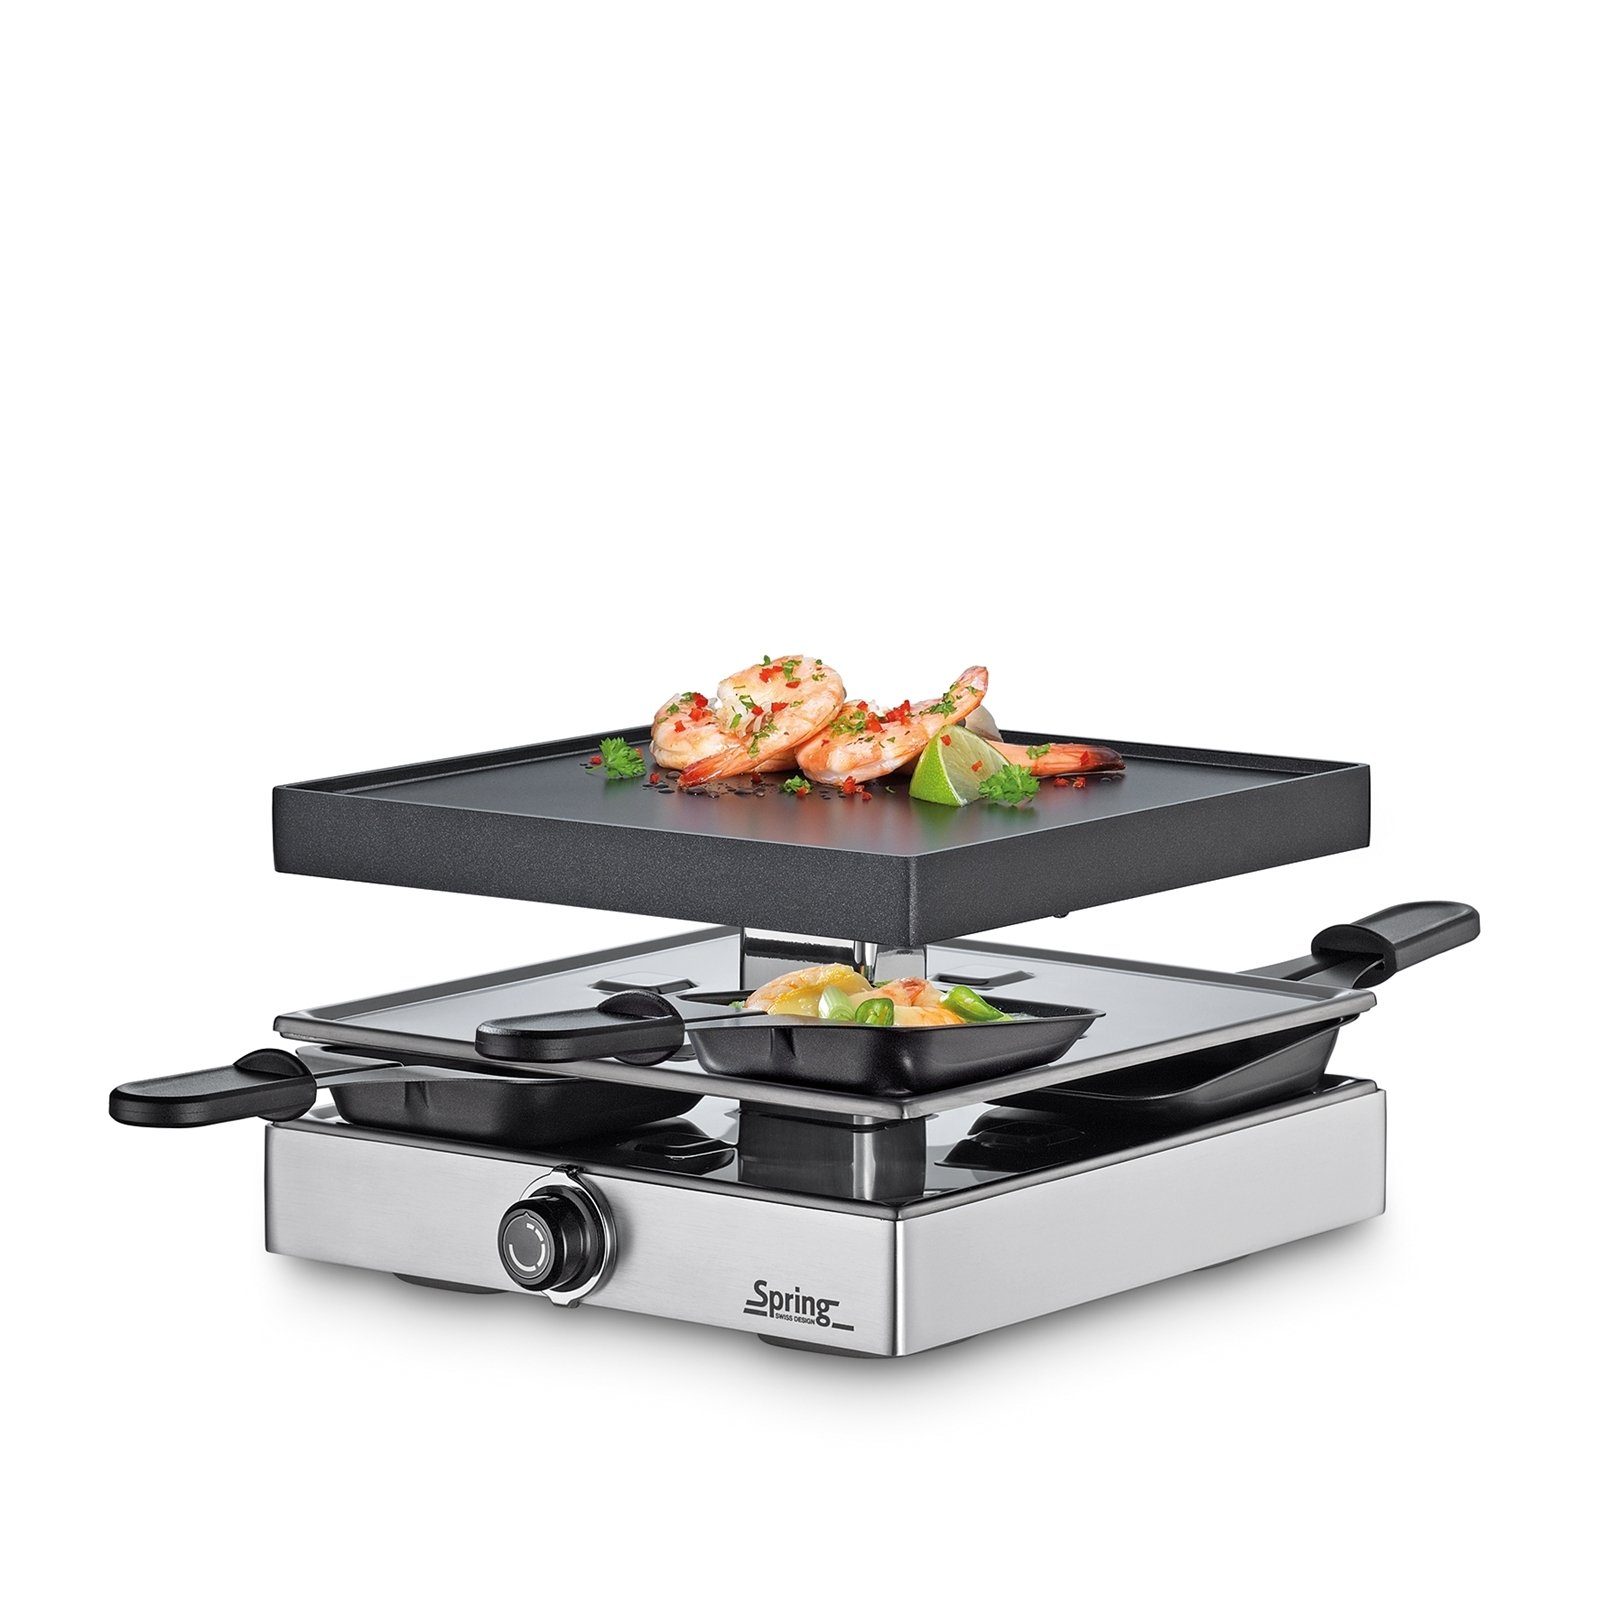 Spring Raclette Raclette 4 mit Alugrillplatte Classic Silber